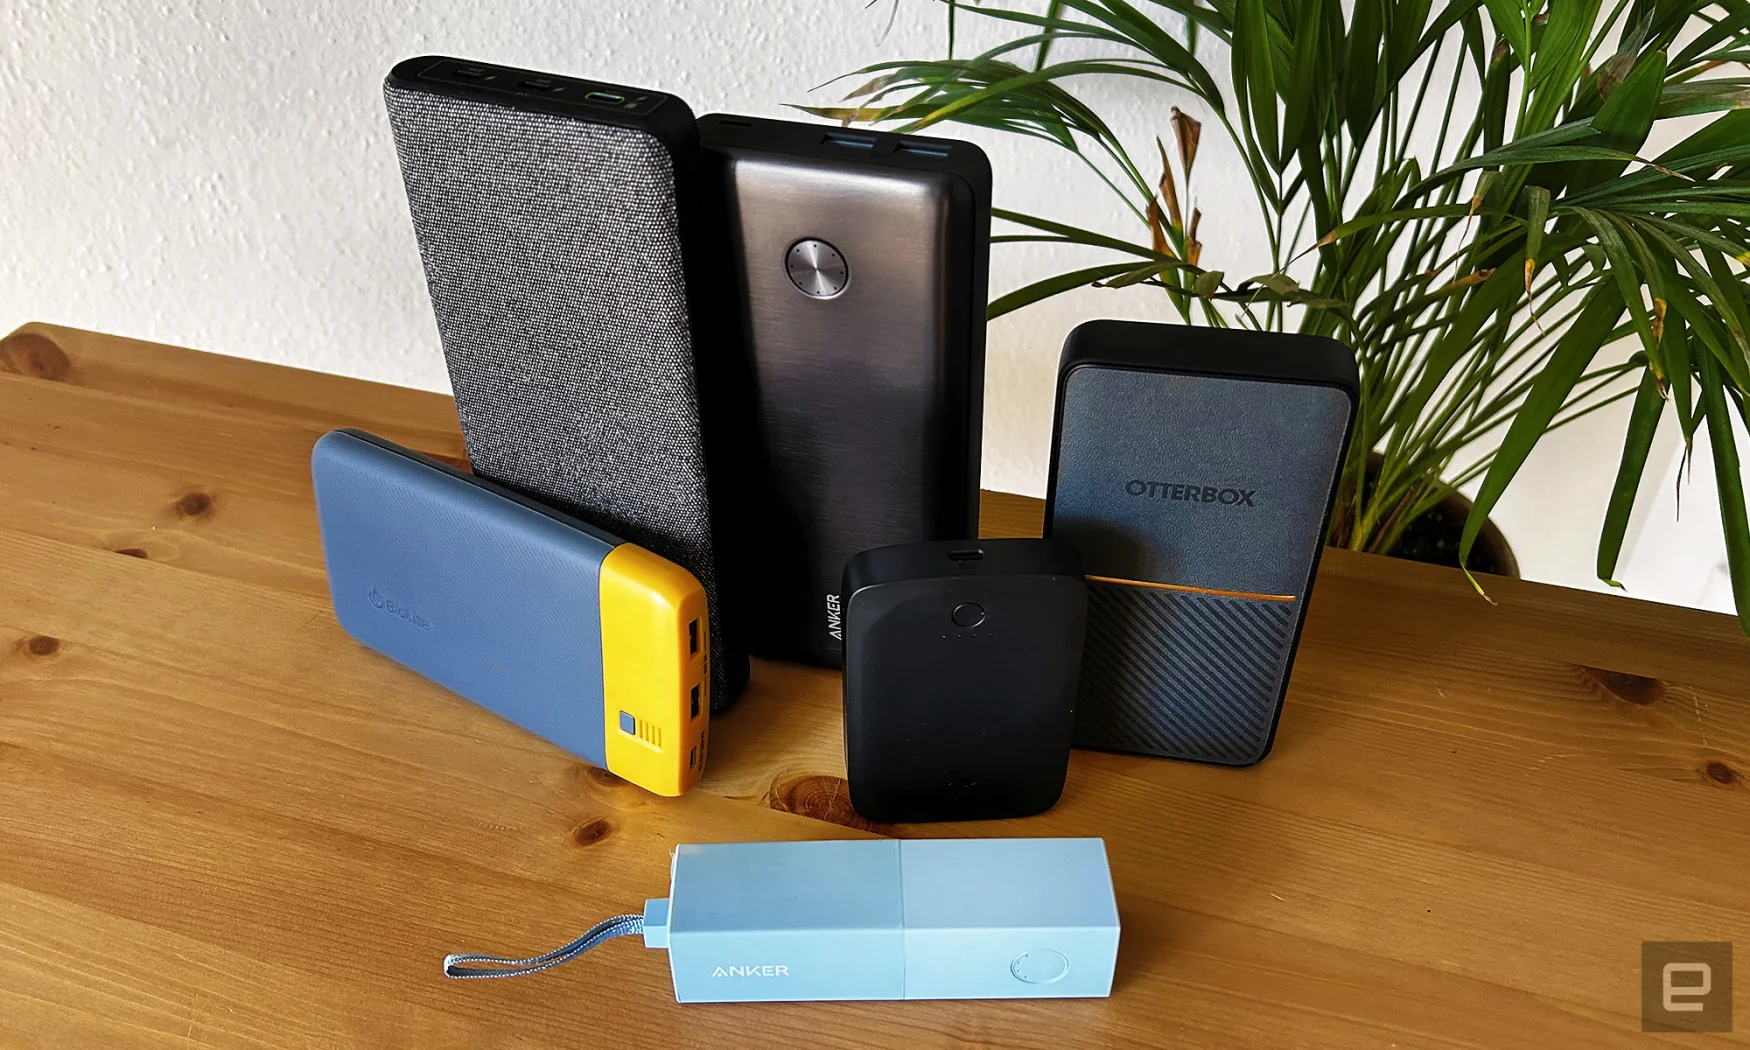 The six winning power banks arranged on a wooden table with a houseplant in the background 